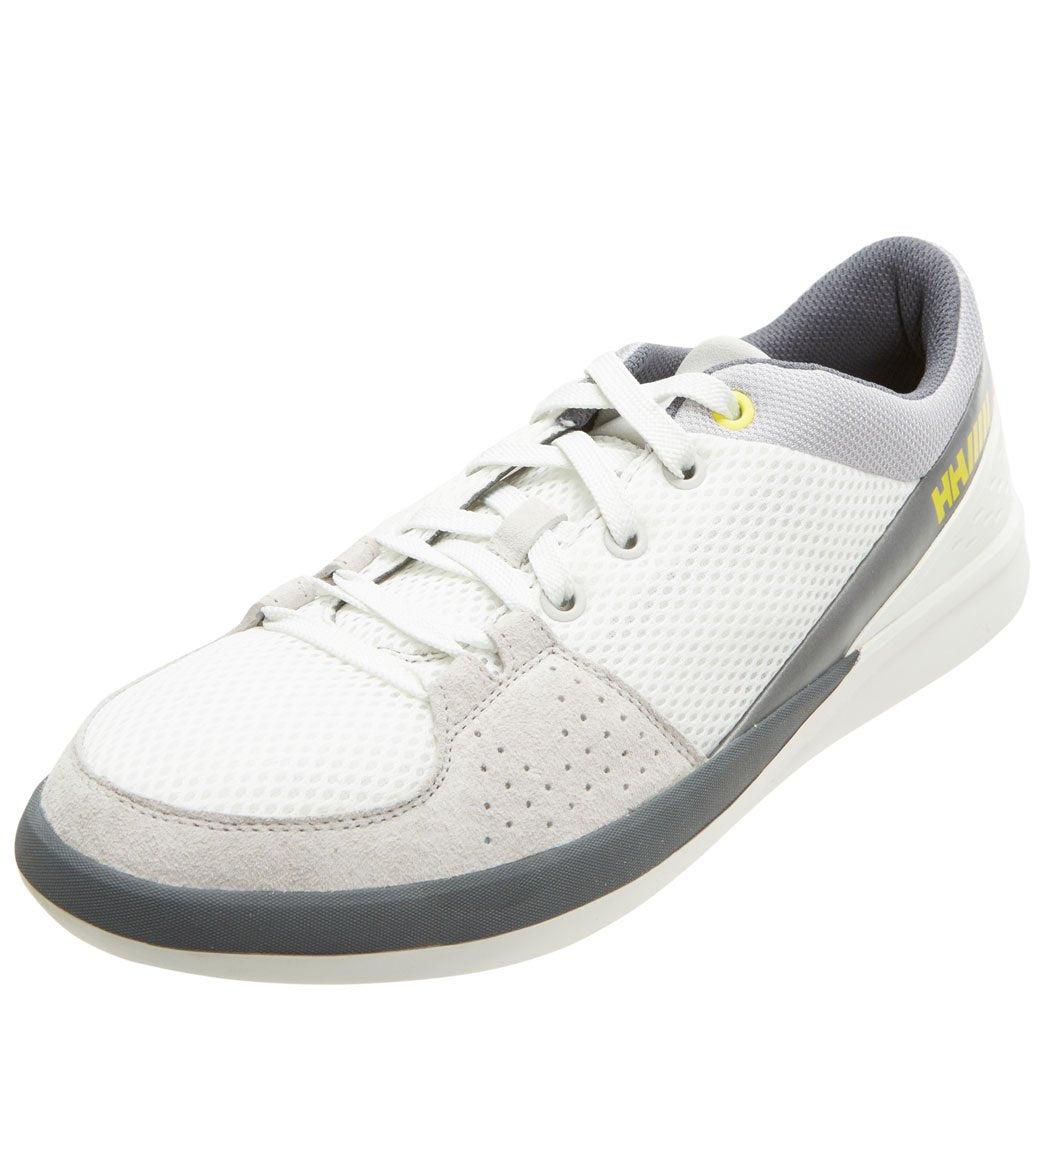 Helly Hansen Men's Hh 5.5 Medium Water Shoes - Off White/Light Grey/Charcoal/Neon Yellow 7.5 - Swimoutlet.com